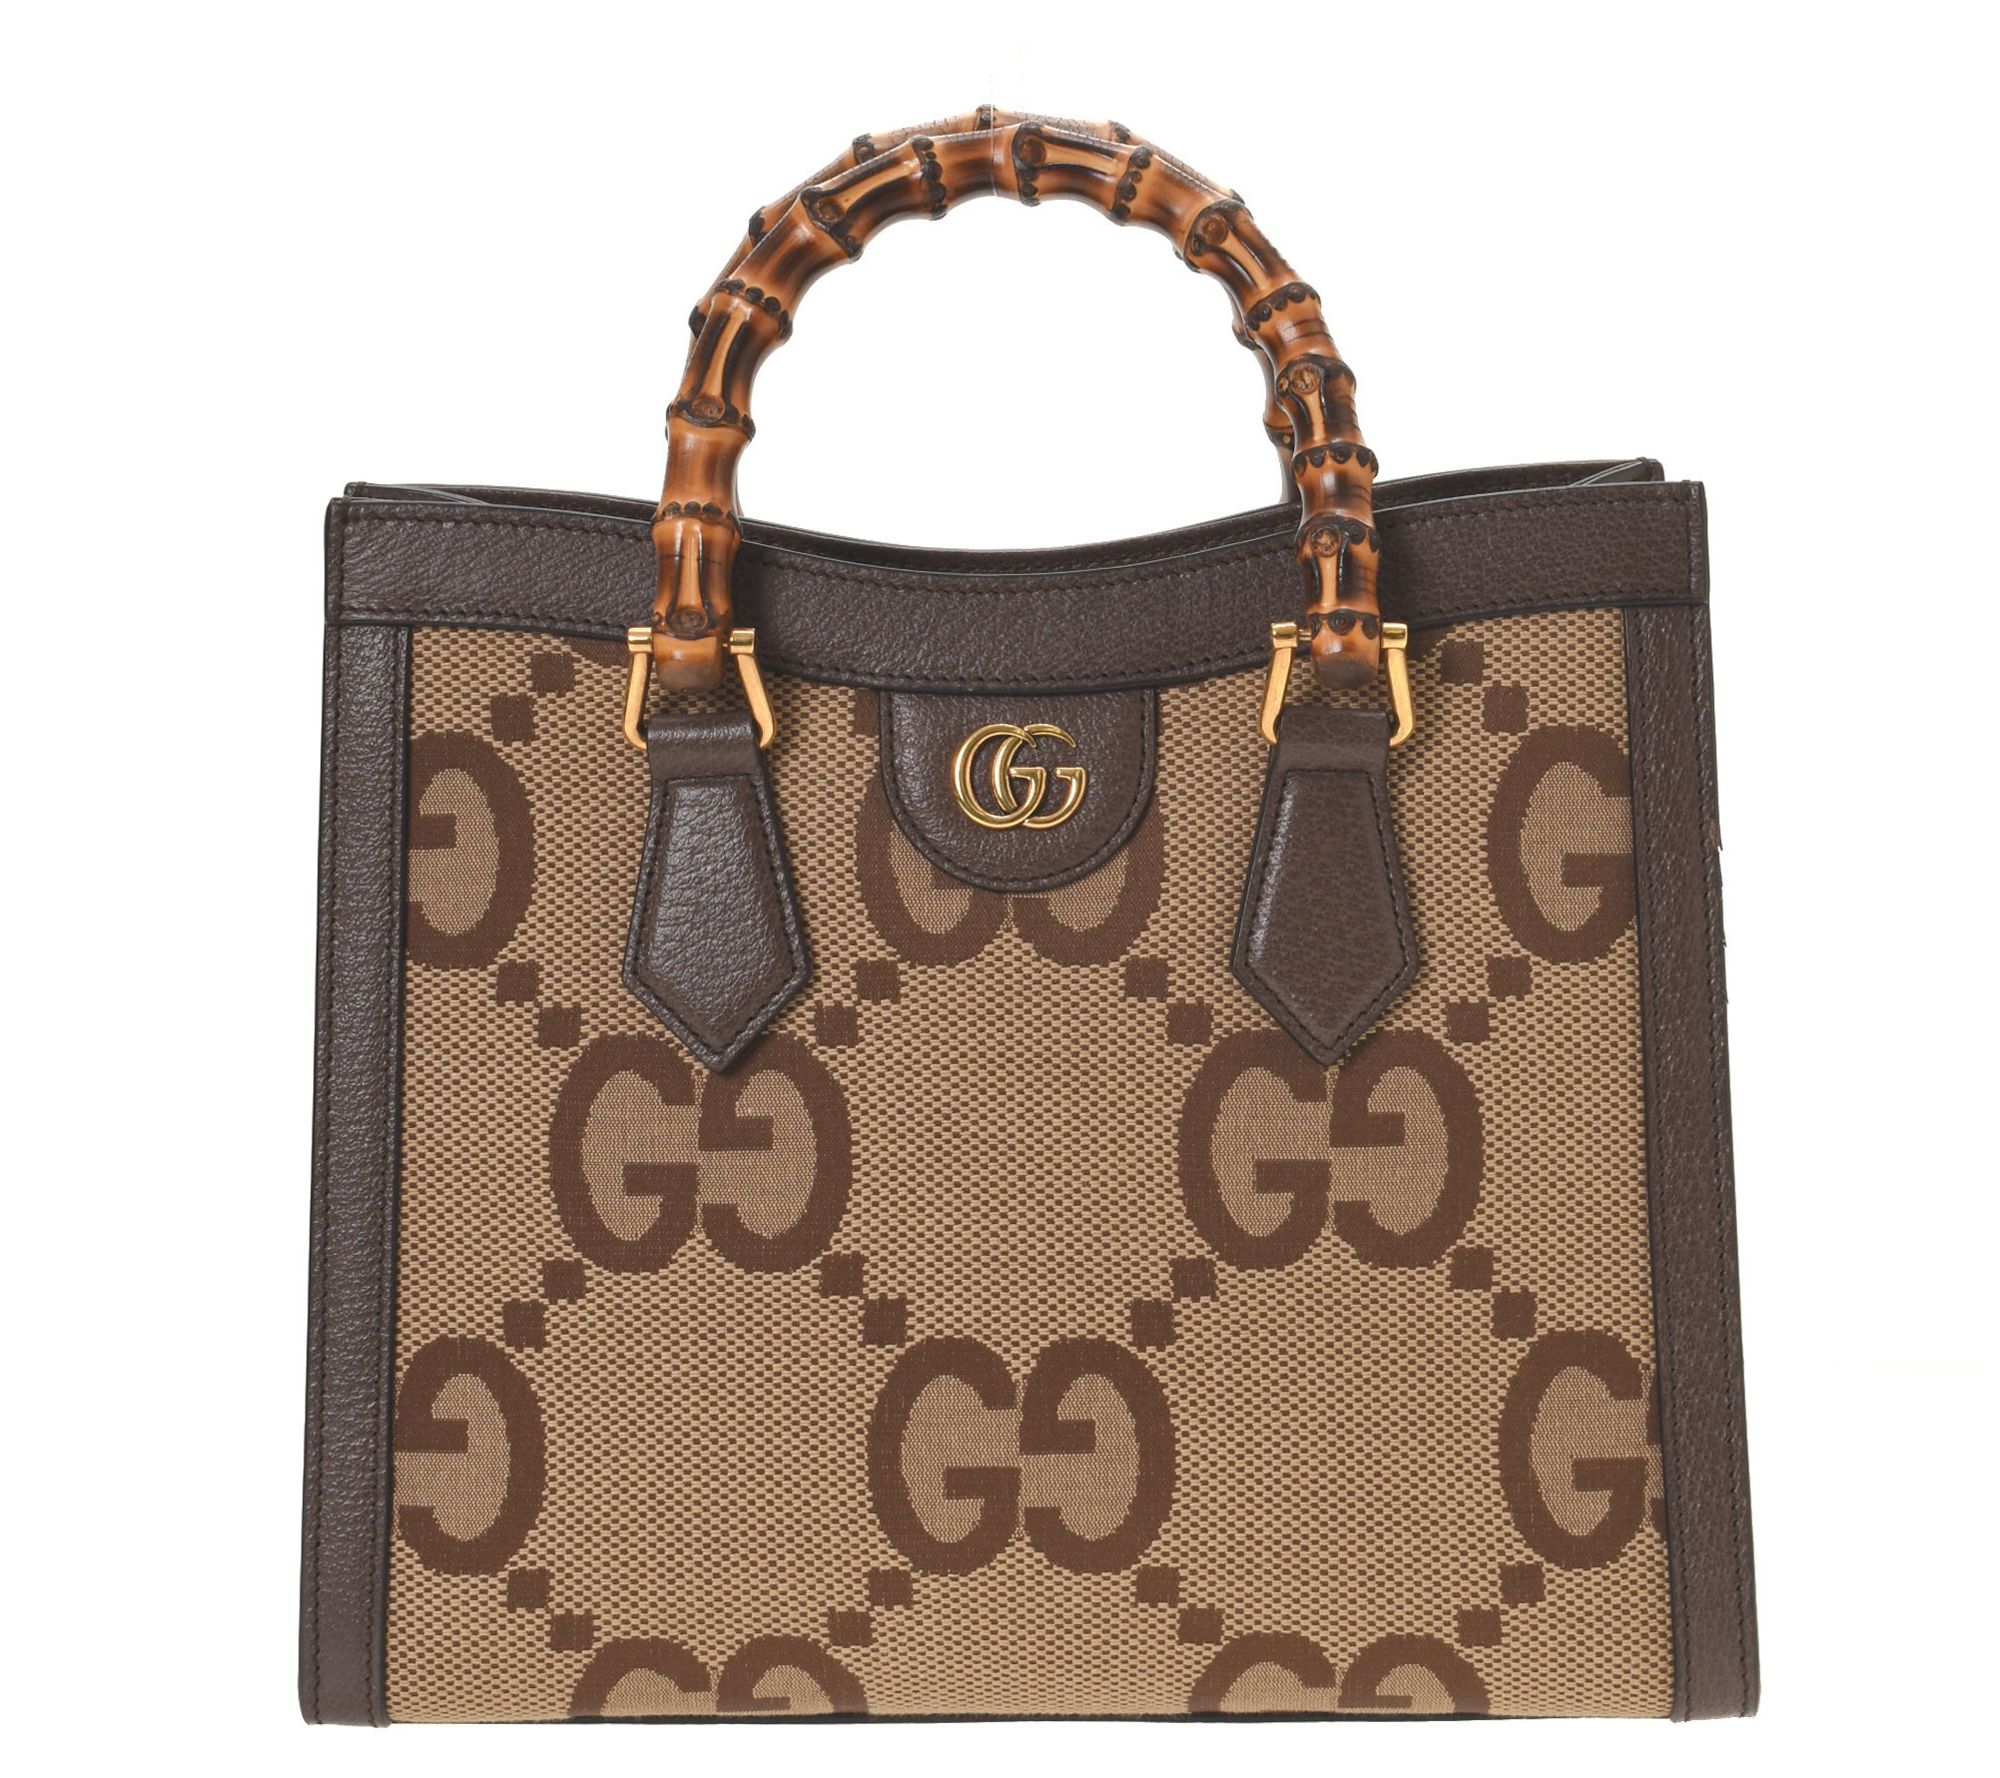 GUCCI - Ophidia GG medium tote bag Pre-Owned Excellent Condition!